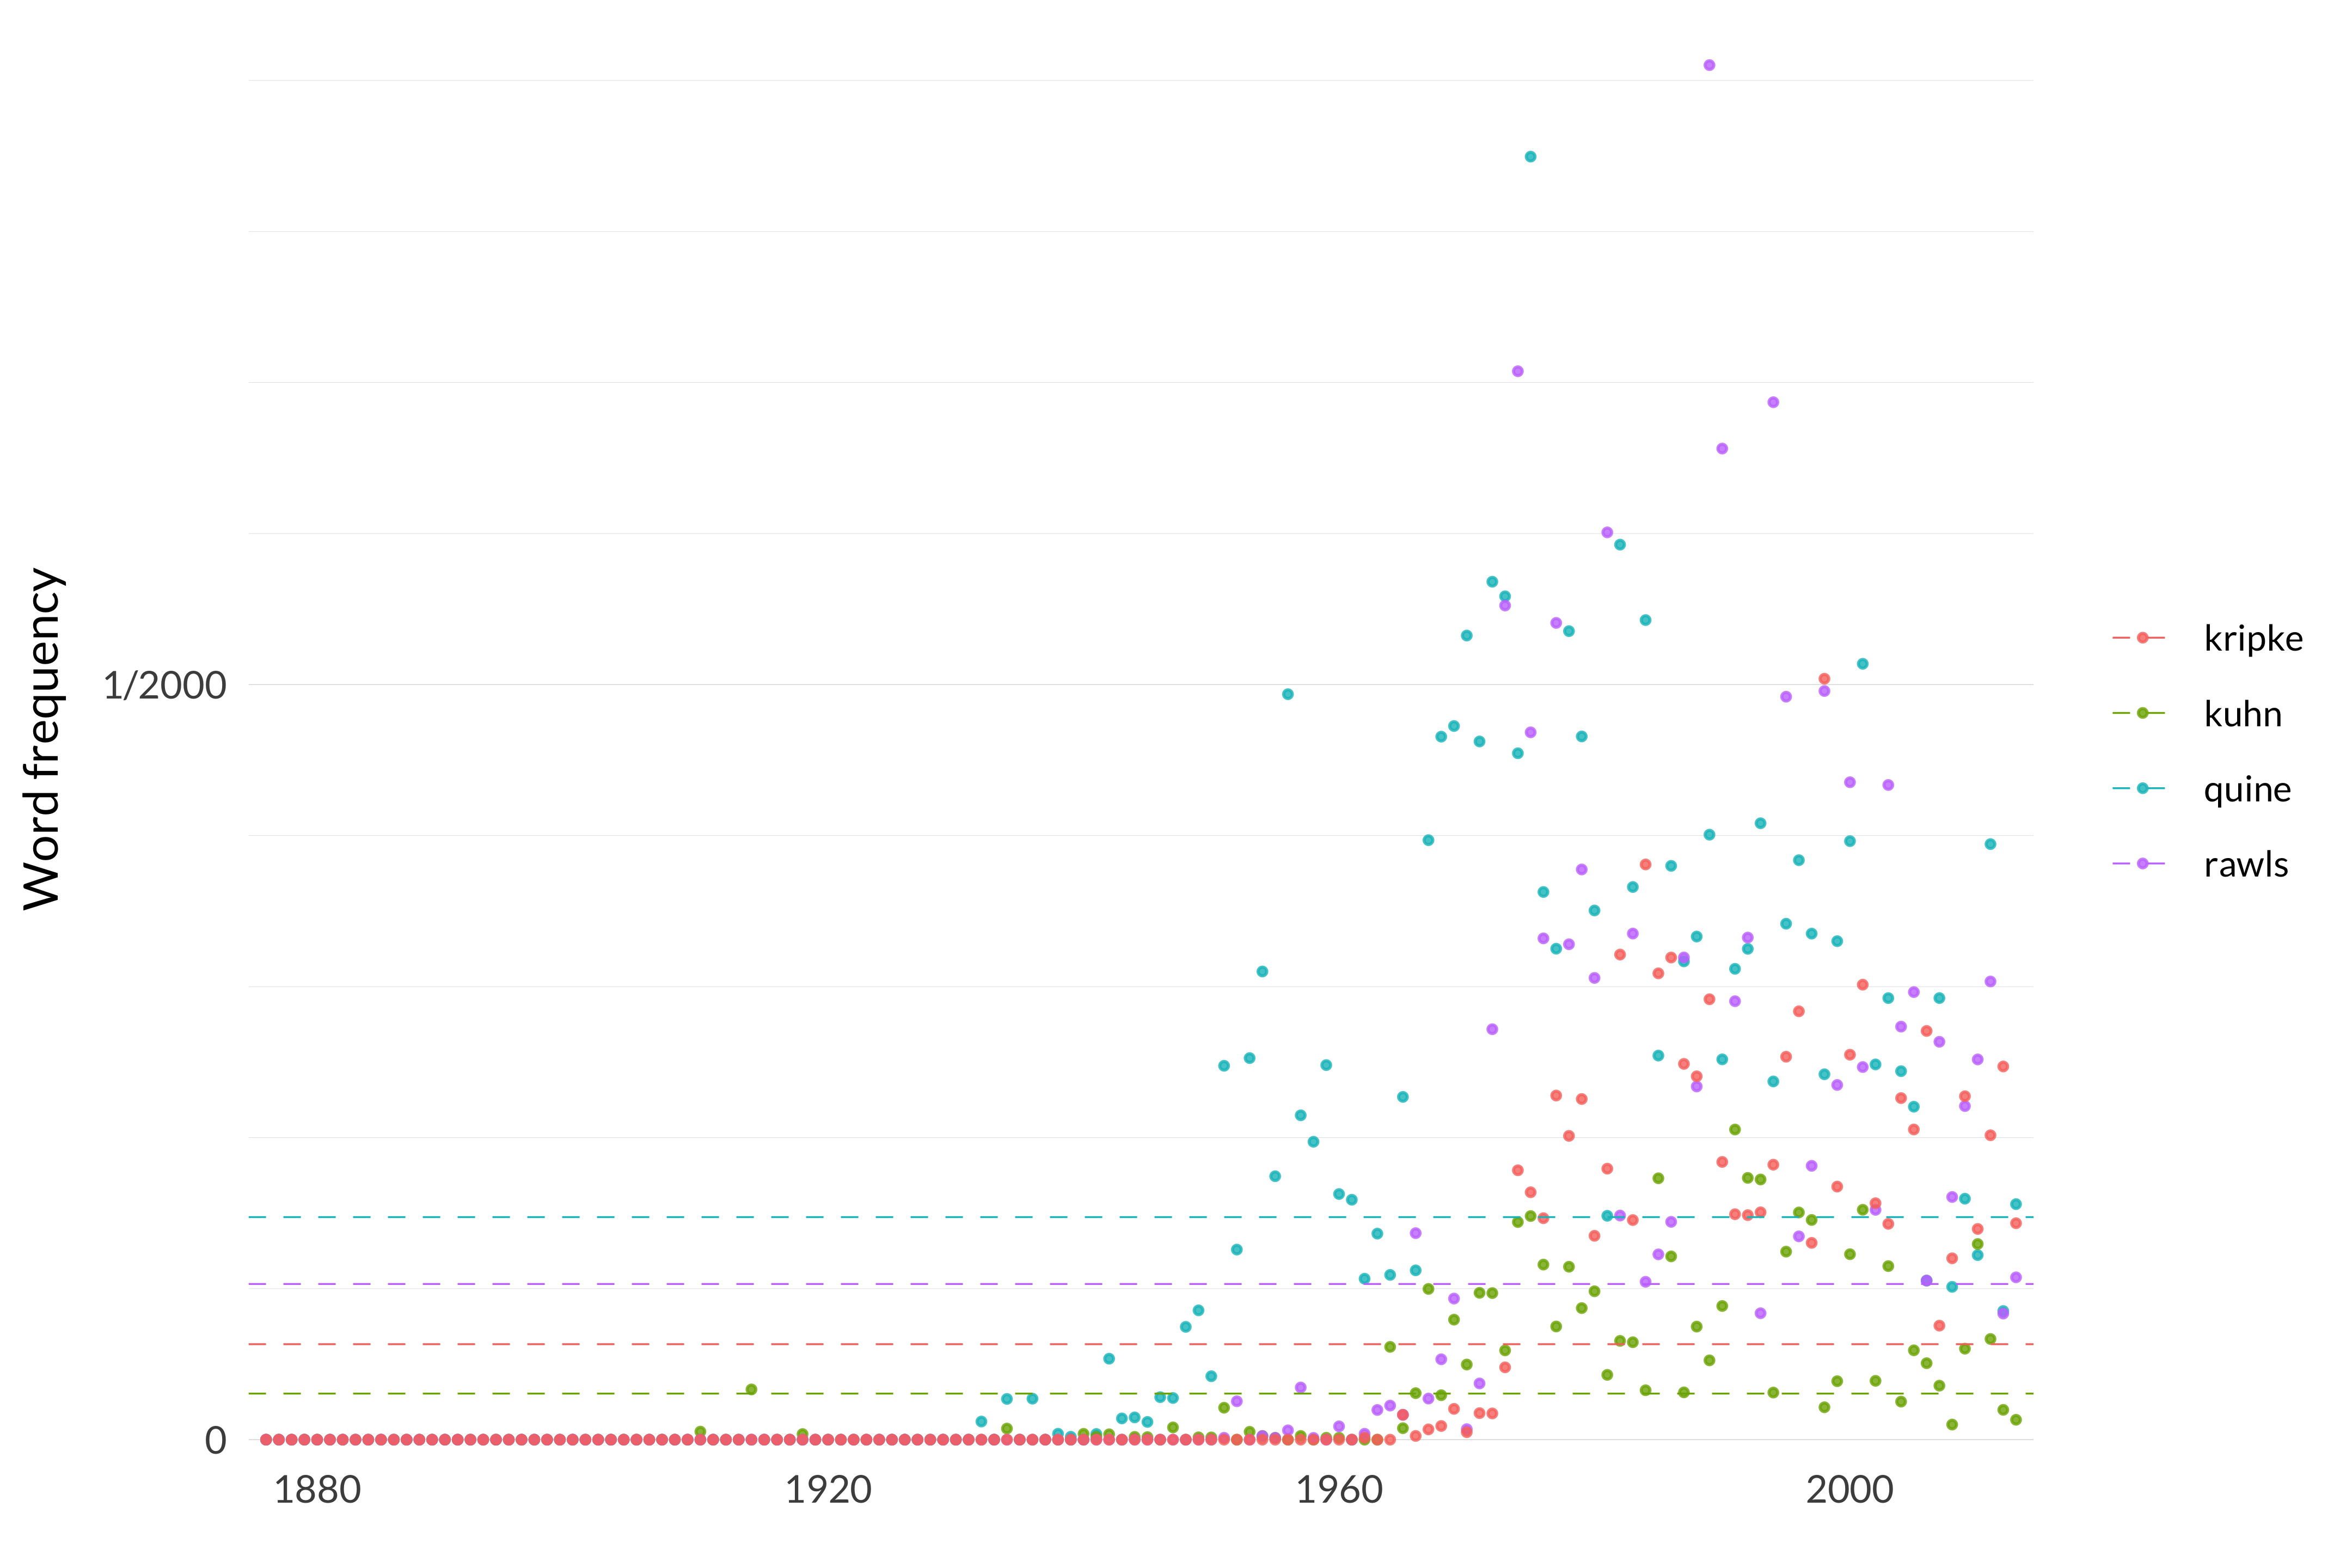 A scatterplot showing the frequency of the words quine, kuhn, rawls, kripke. The word quine appears, on average across the years, 147 times per million words, and in the median year, it appears 28 times per million words. Its most frequent occurrence is in 1975 when it appears 850 times per million words, and its least frequent occurrence is in 1876 when it appears 0 times per million words. The word kuhn appears, on average across the years, 31 times per million words, and in the median year, it appears 0 times per million words. Its most frequent occurrence is in 1991 when it appears 205 times per million words, and its least frequent occurrence is in 1876 when it appears 0 times per million words. The word rawls appears, on average across the years, 103 times per million words, and in the median year, it appears 0 times per million words. Its most frequent occurrence is in 1989 when it appears 910 times per million words, and its least frequent occurrence is in 1876 when it appears 0 times per million words. The word kripke appears, on average across the years, 63 times per million words, and in the median year, it appears 0 times per million words. Its most frequent occurrence is in 1998 when it appears 504 times per million words, and its least frequent occurrence is in 1876 when it appears 0 times per million words. 